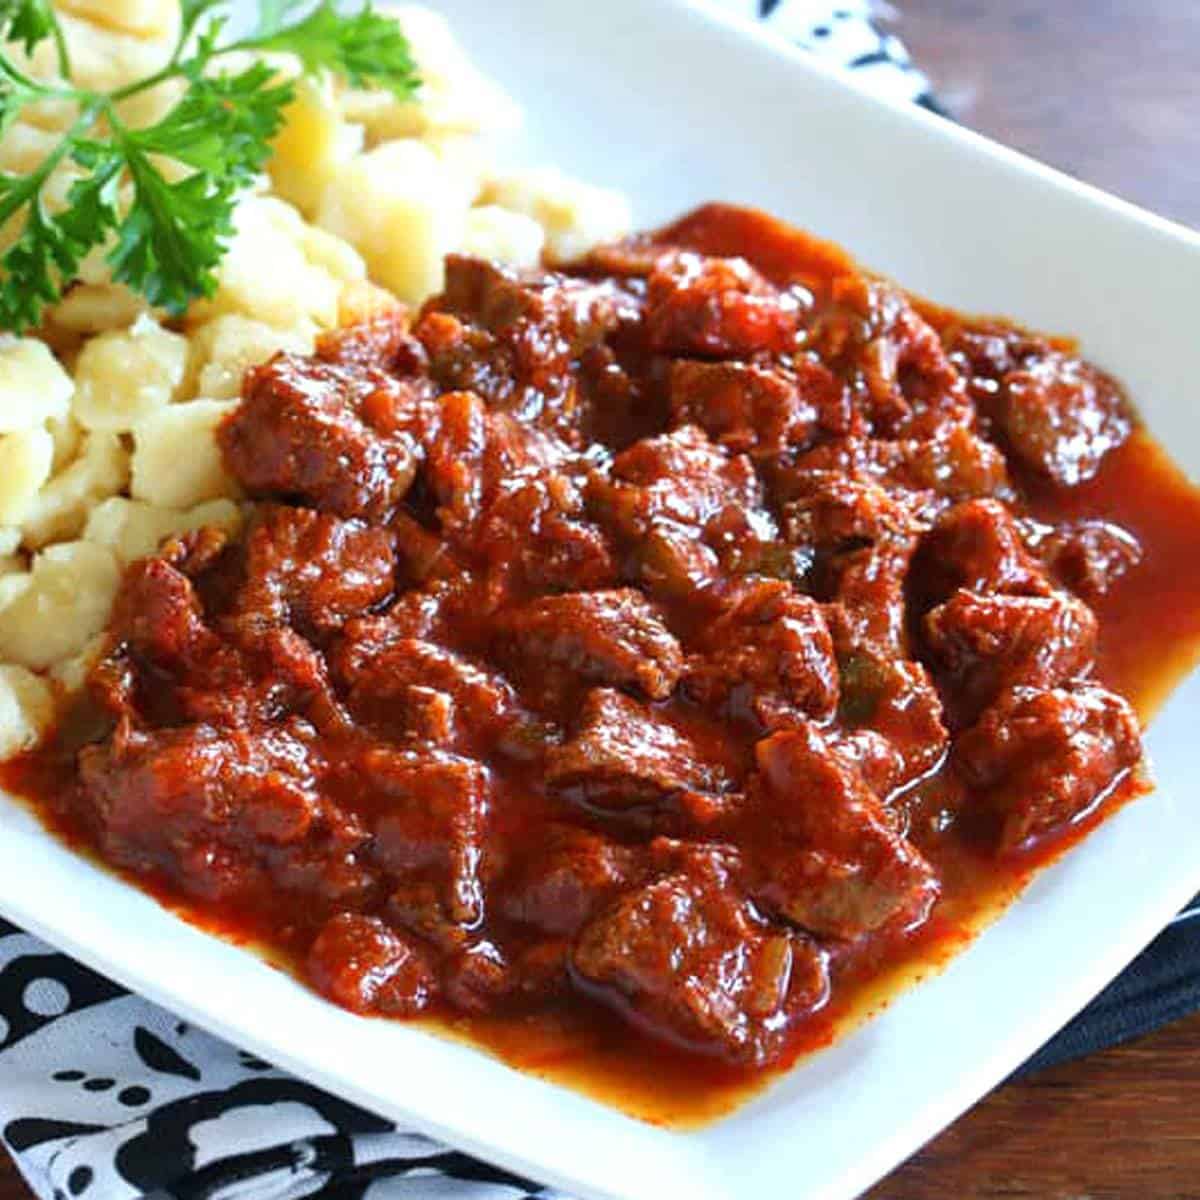 Authentic Pörkölt (Hungarian Beef and Onion Stew) - The Daring Gourmet